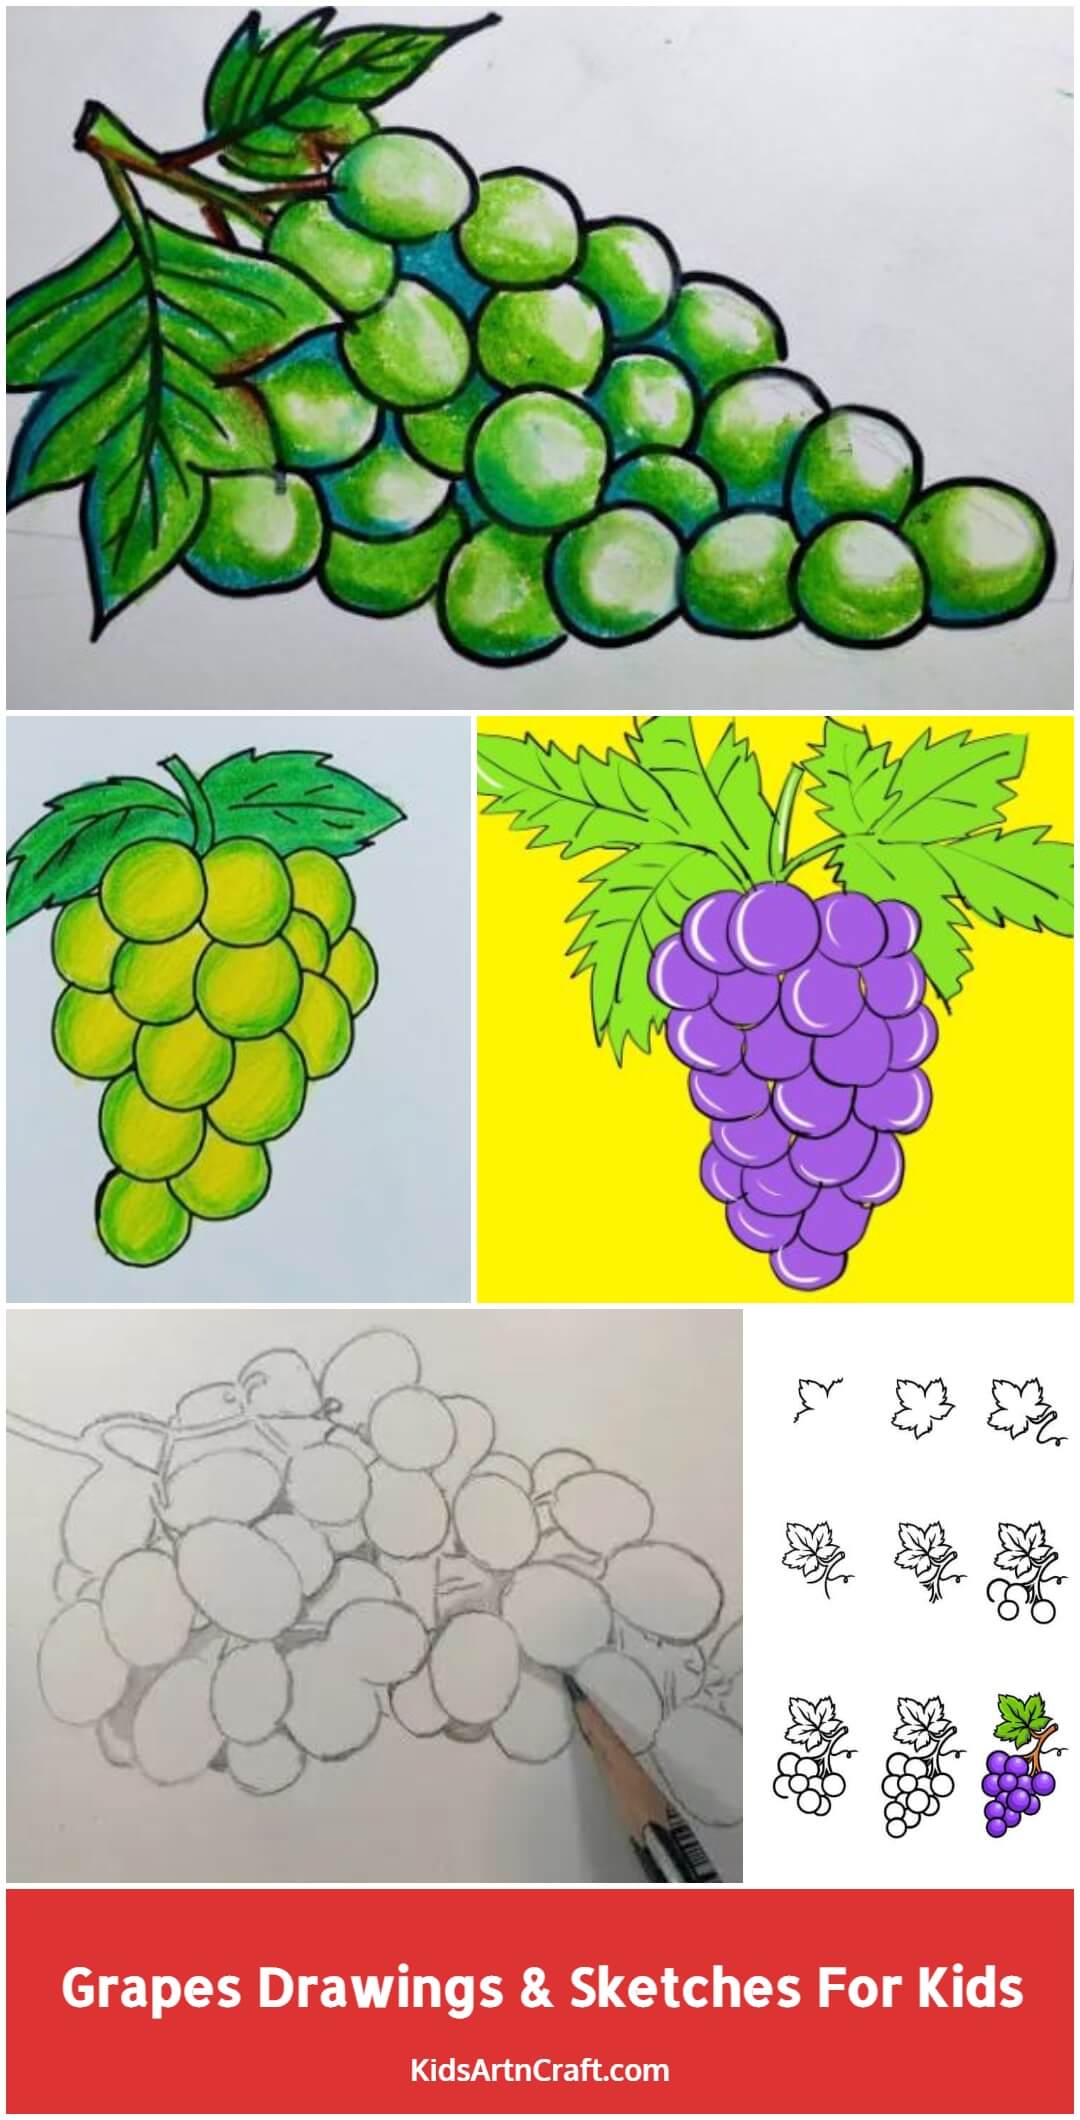 Grapes Drawings & Sketches For Kids